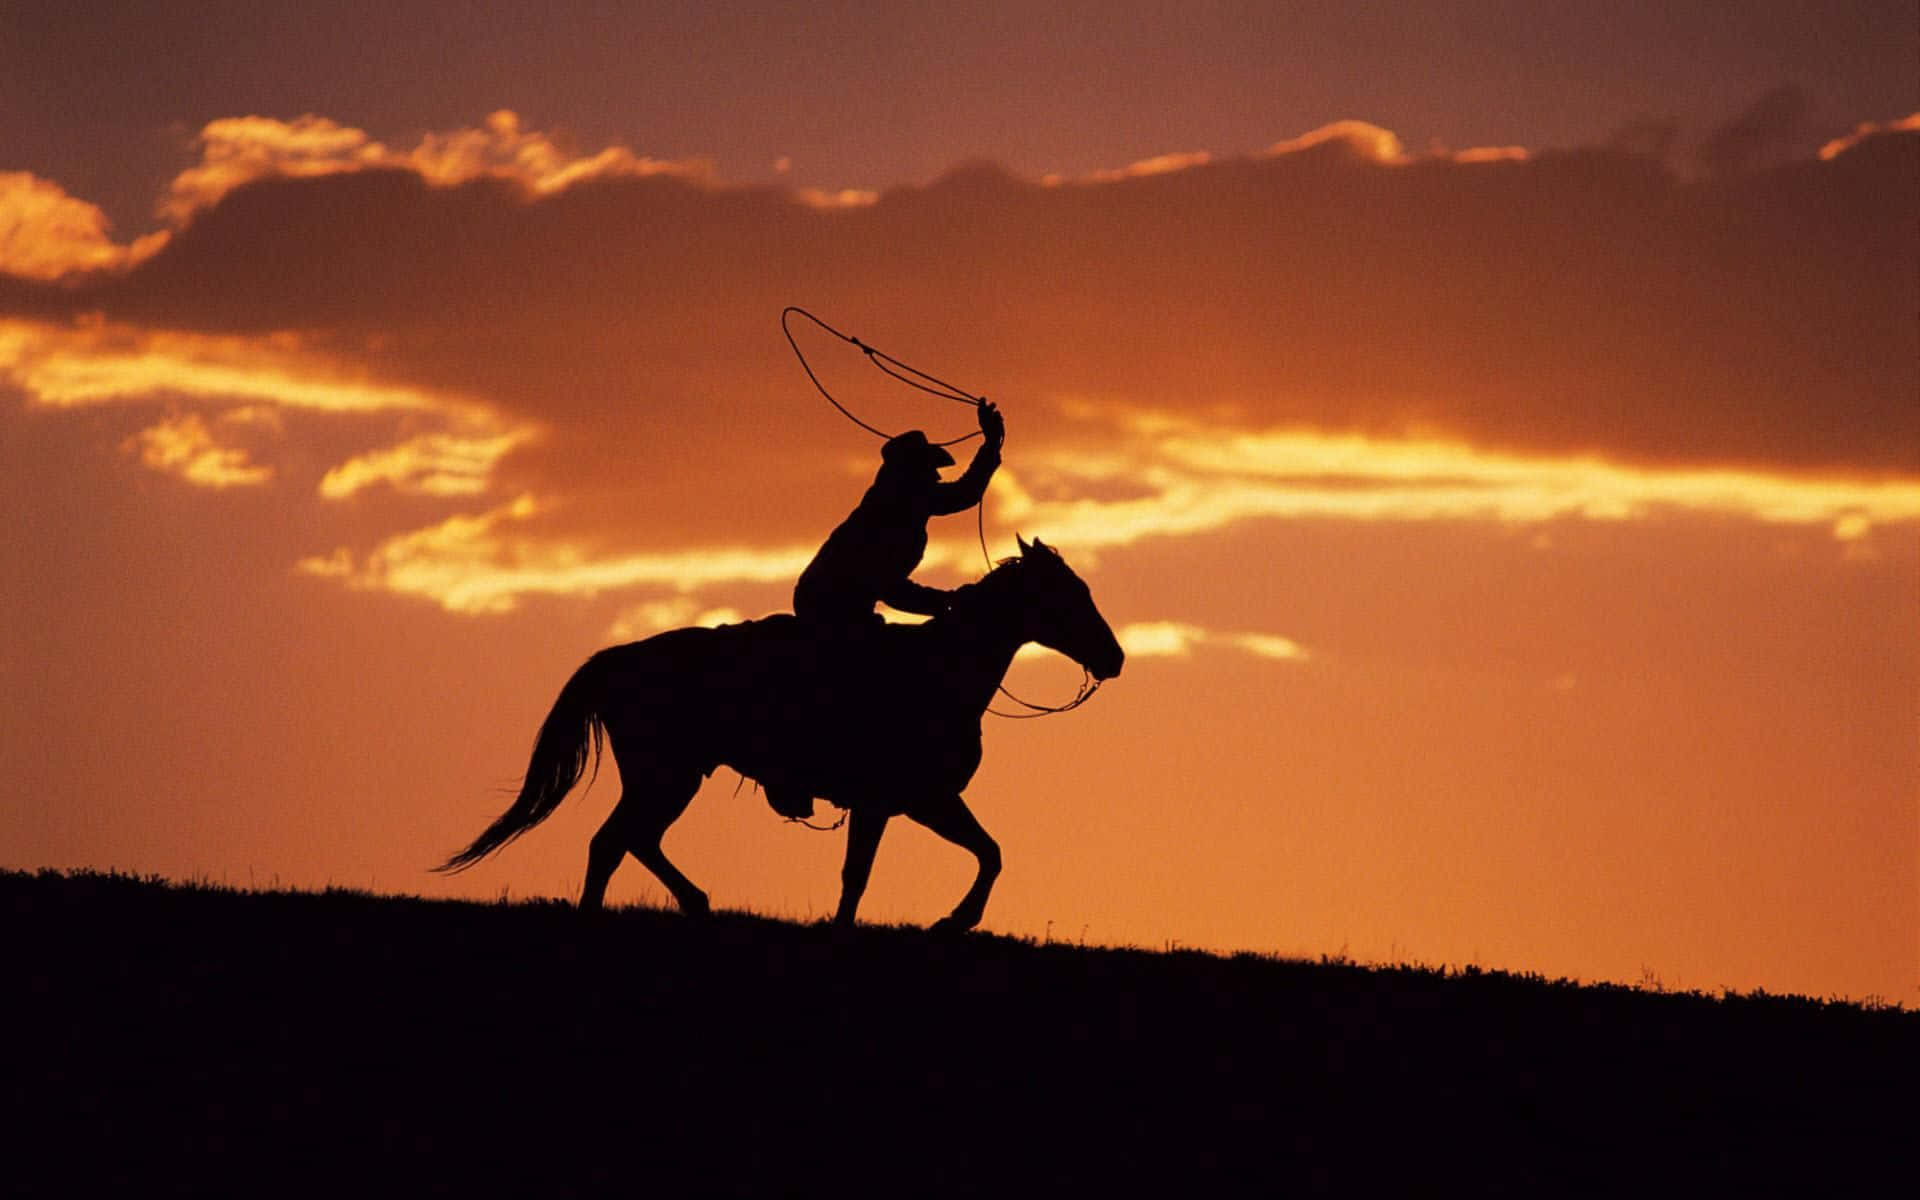 A Cowboy On A Horse Is Silhouetted At Sunset Wallpaper